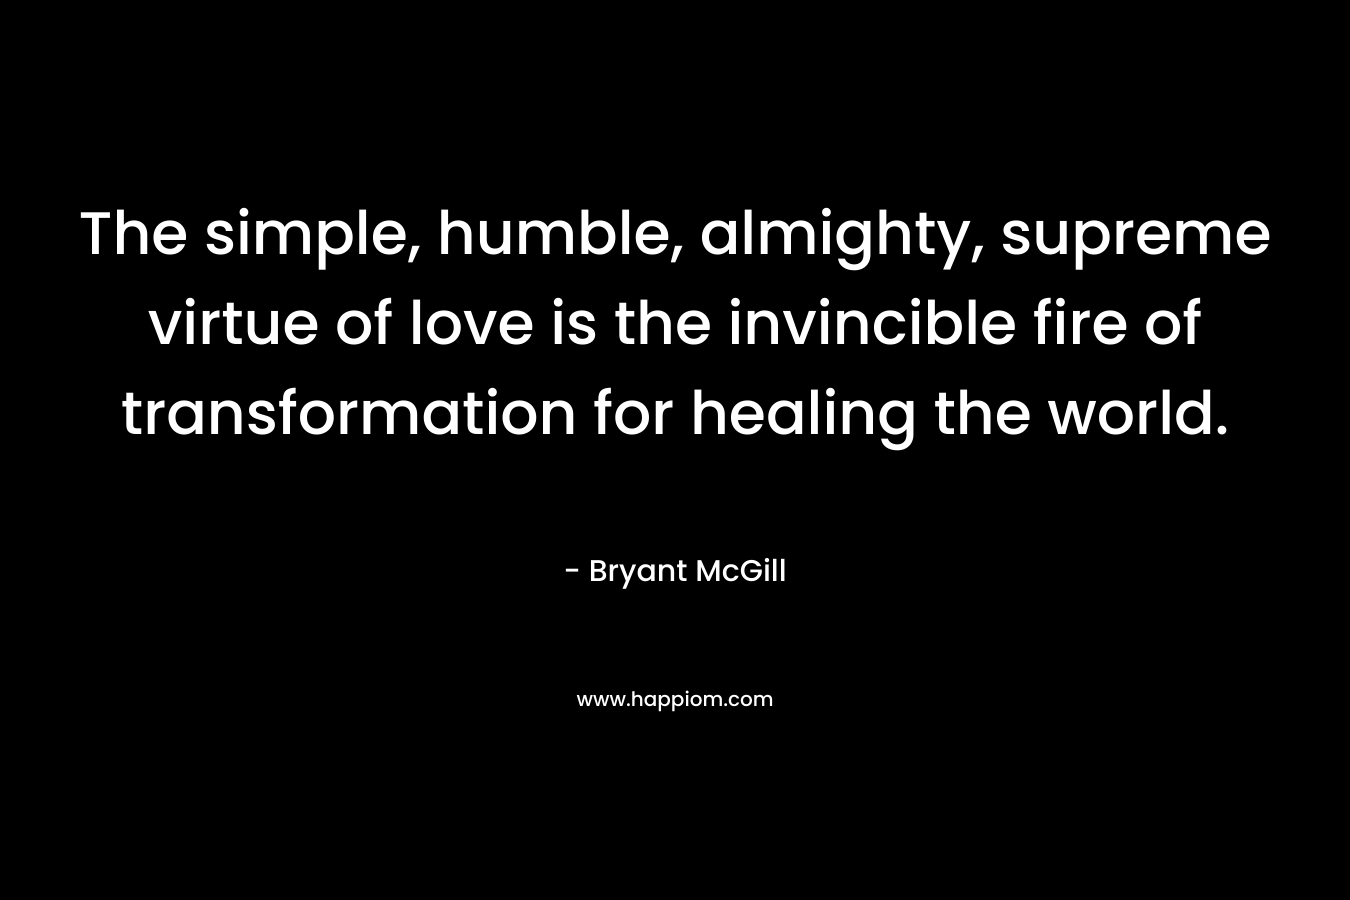 The simple, humble, almighty, supreme virtue of love is the invincible fire of transformation for healing the world. – Bryant McGill